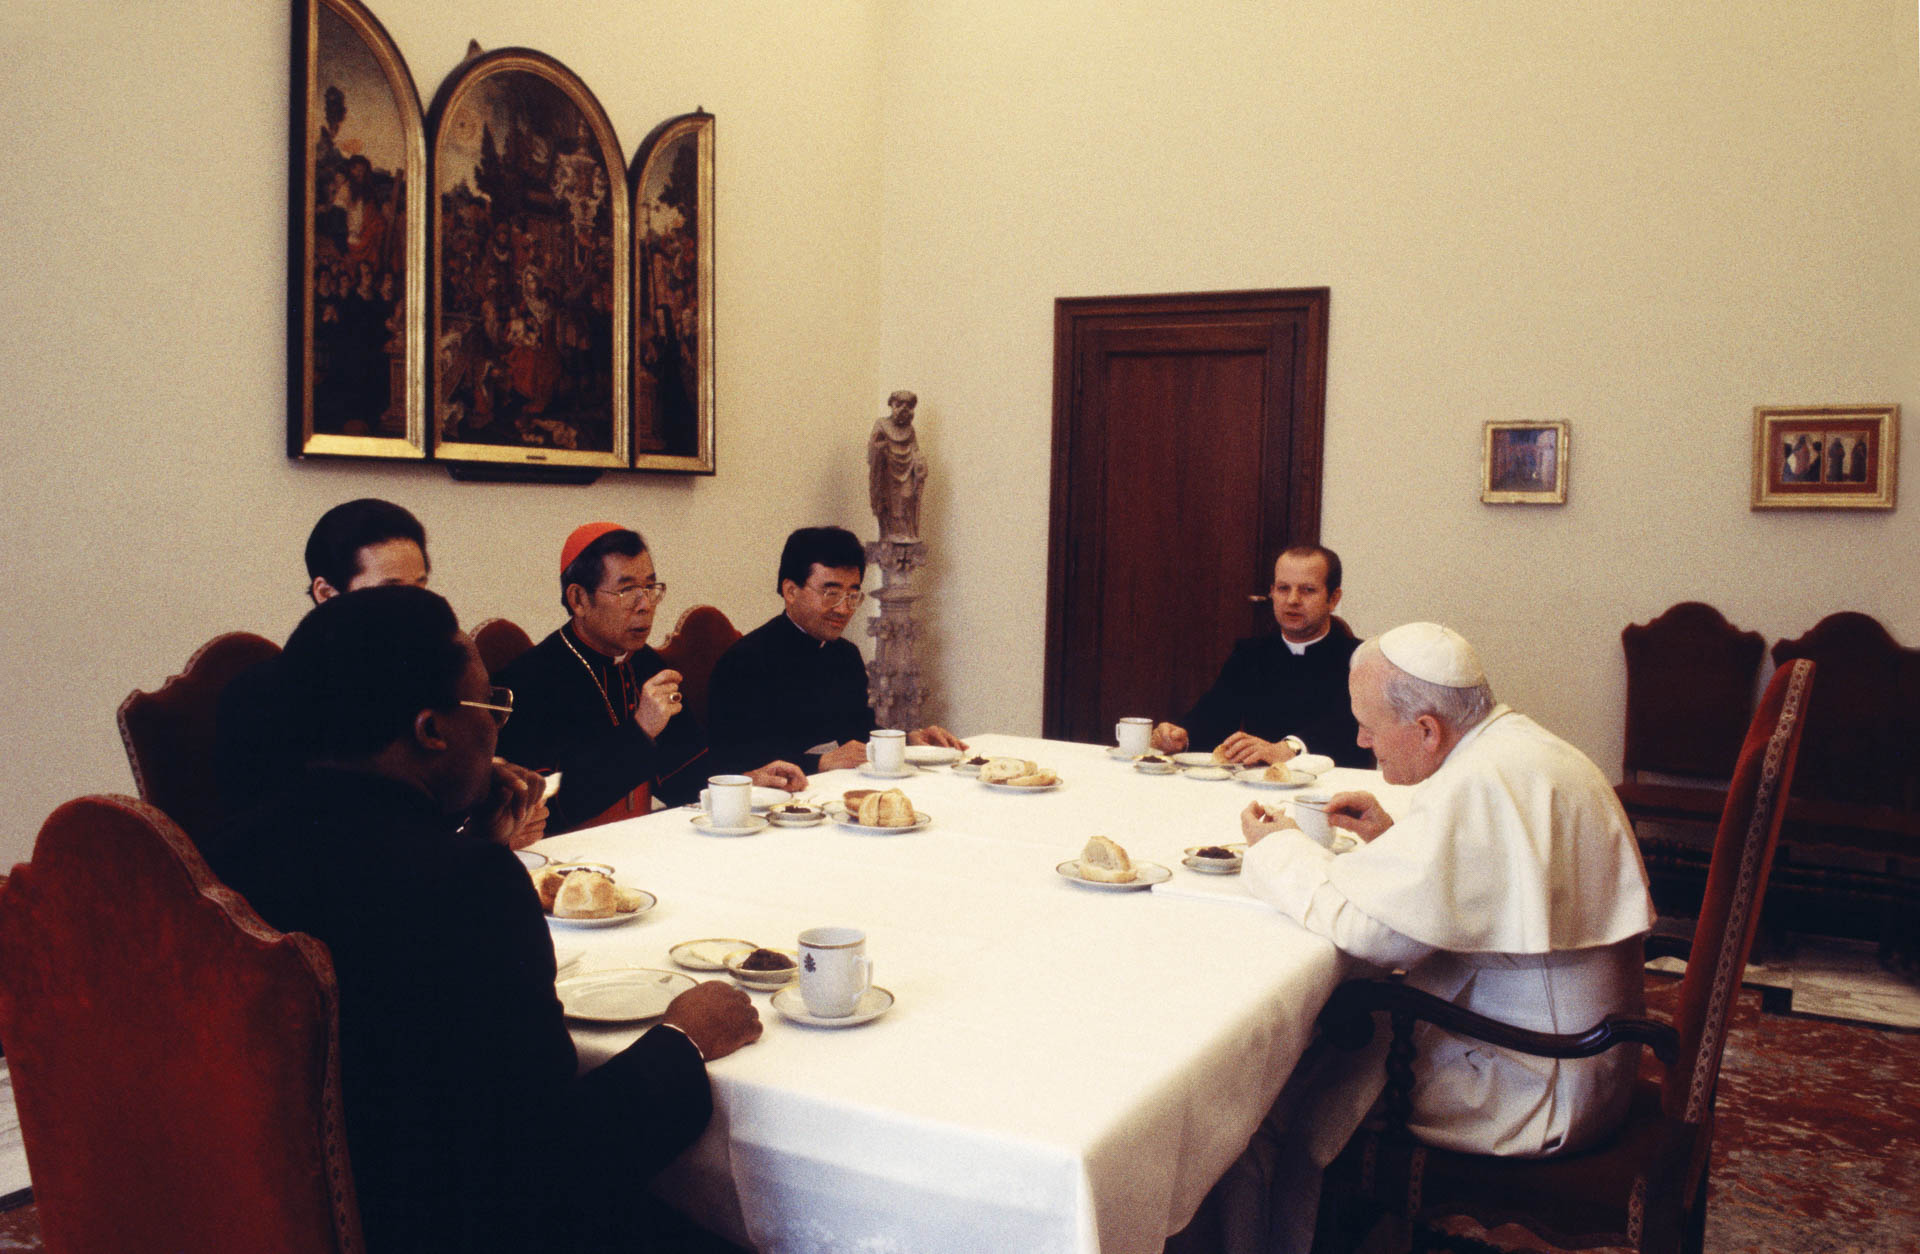  The Vatican - February 1986 A day in the life of the Pope John Paul II in the intimacy of the Vatican: breakfast in the dining room of Palazzo Apostolico with Cardinal Stephen Kim, private secretary Stanislao Dziwisz and his secretary at time Emery 